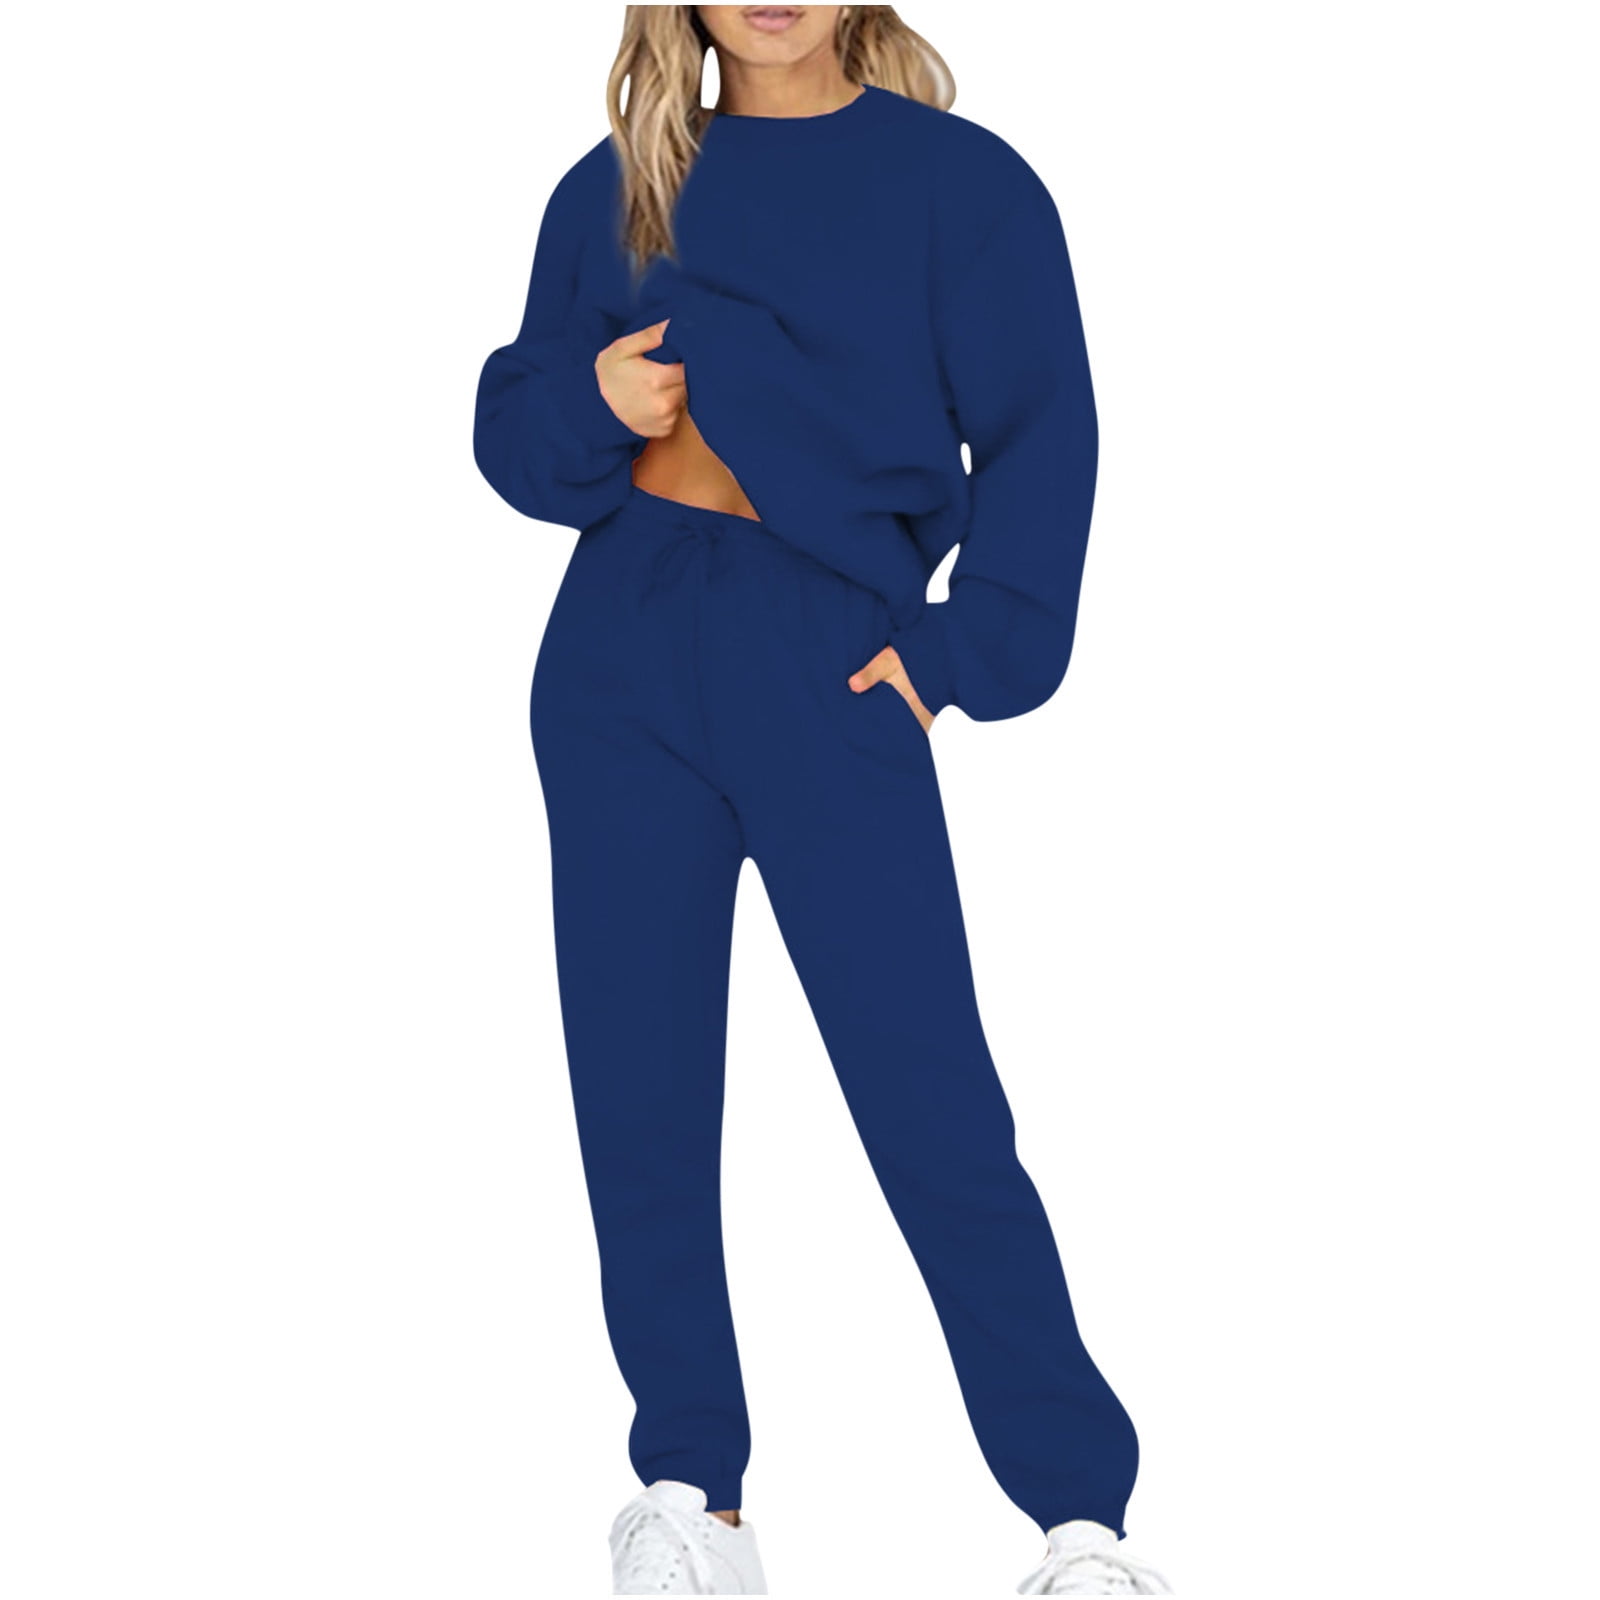  Two Piece Outfits Pullover Hoodie Track Suits Sweatsuits For  Women Jogging Suits Sweatsuit (Apricot,S) : Clothing, Shoes & Jewelry